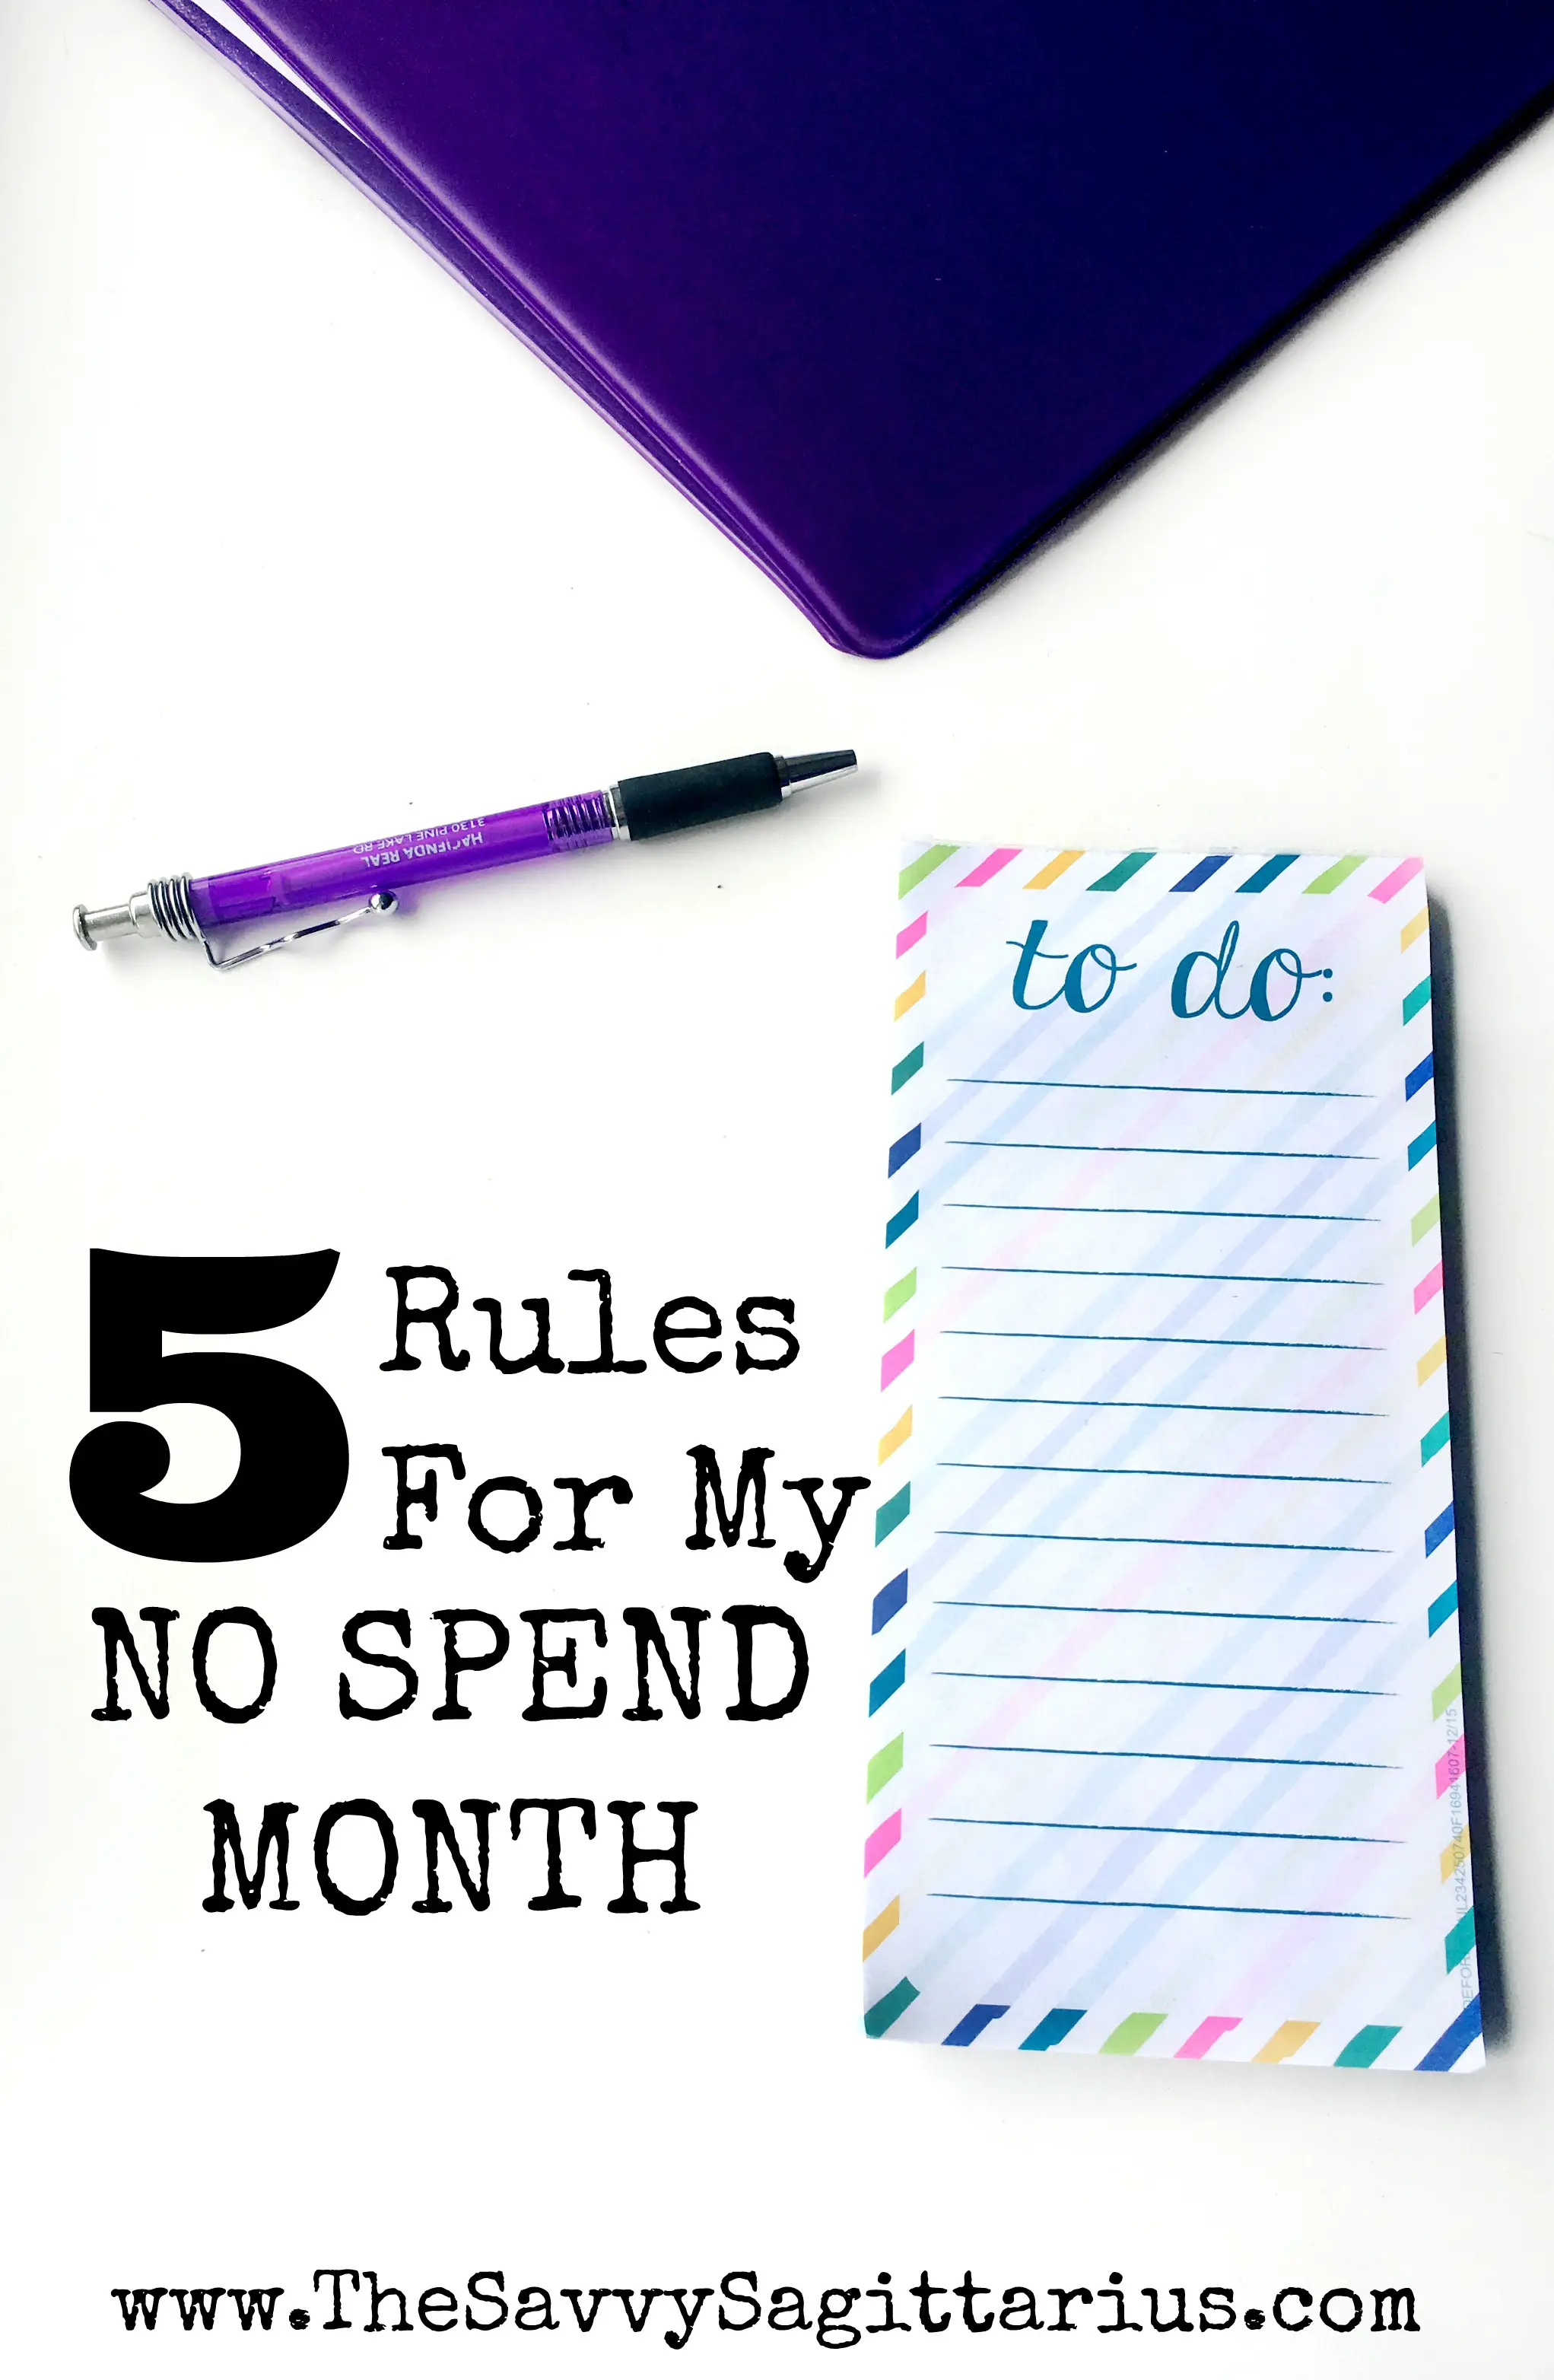 5 Rules To Make the Most of My No Spend Month! The Savvy Sagittarius